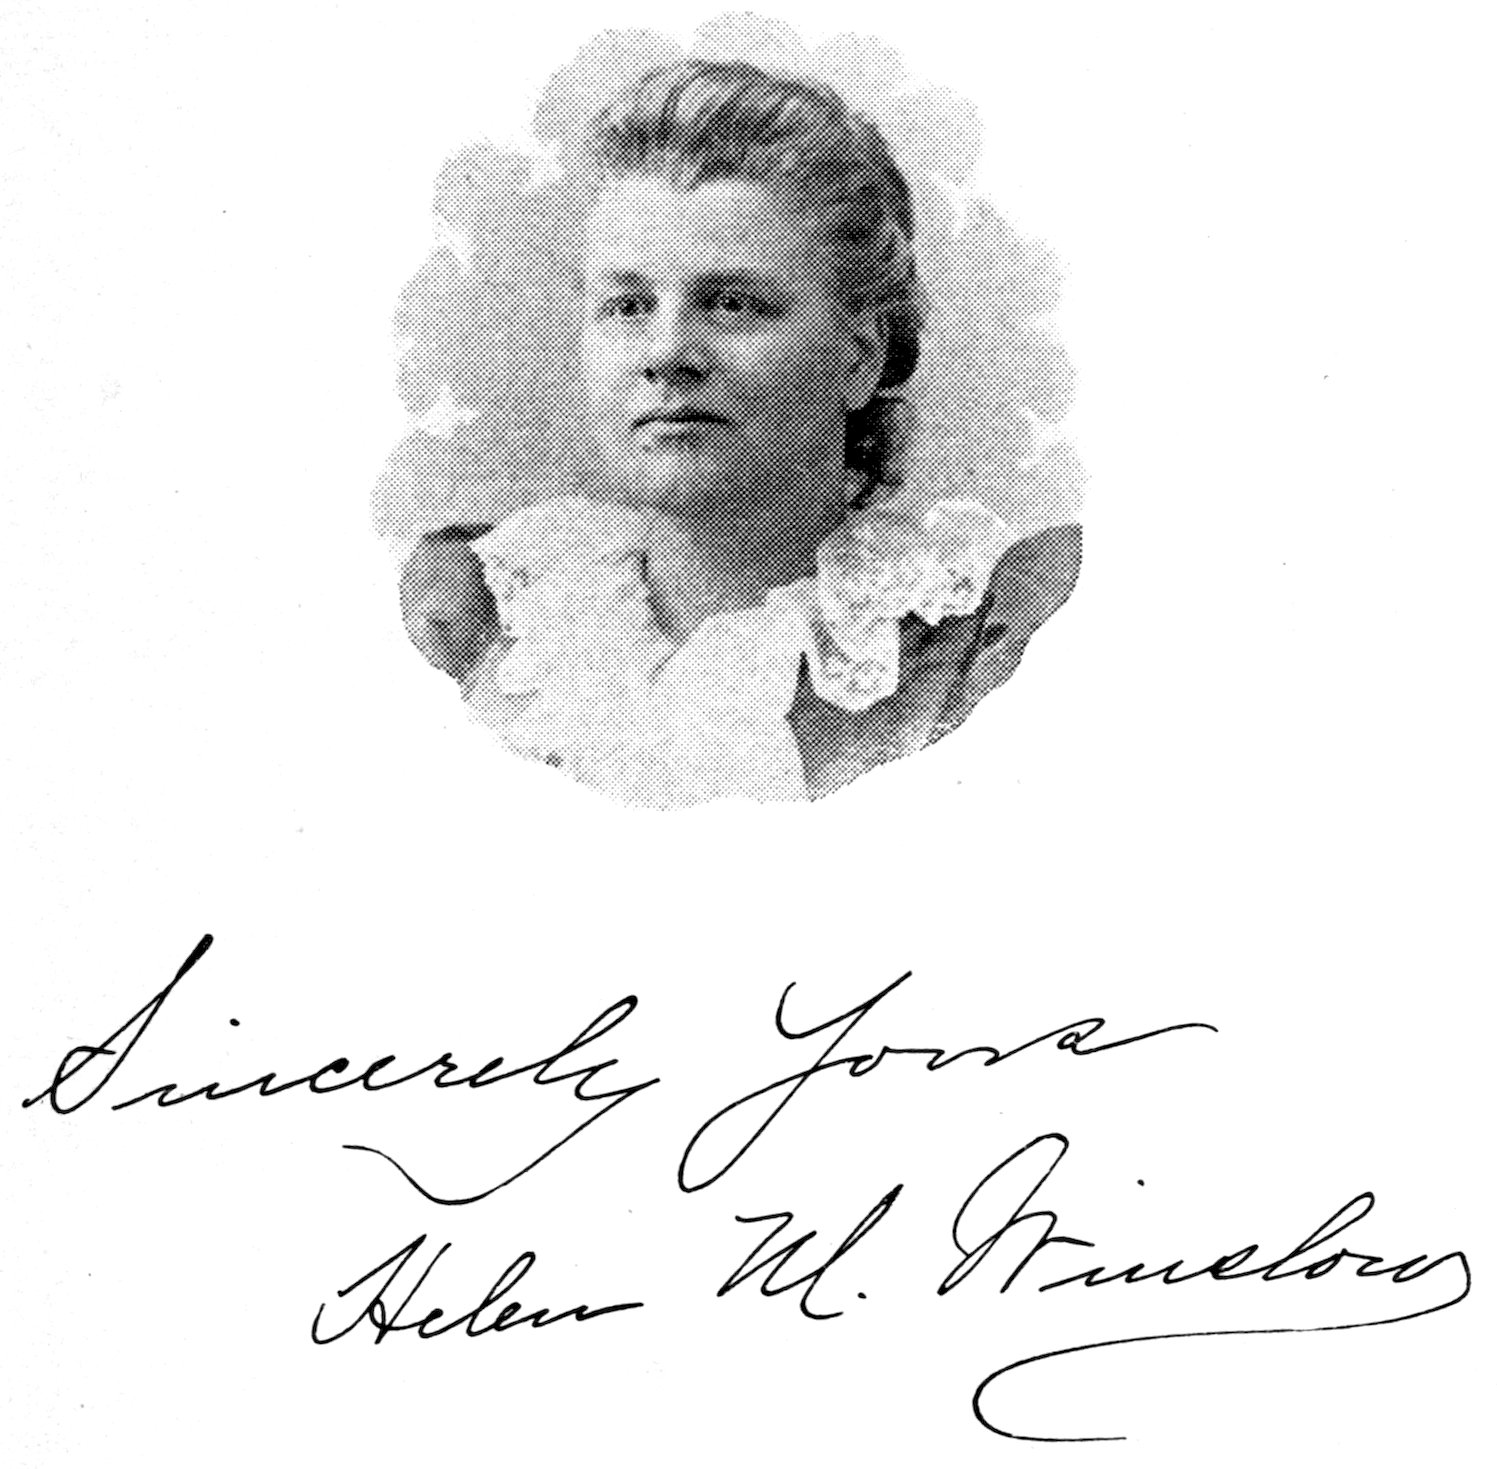 Sincerely Yours Helen M Winslow